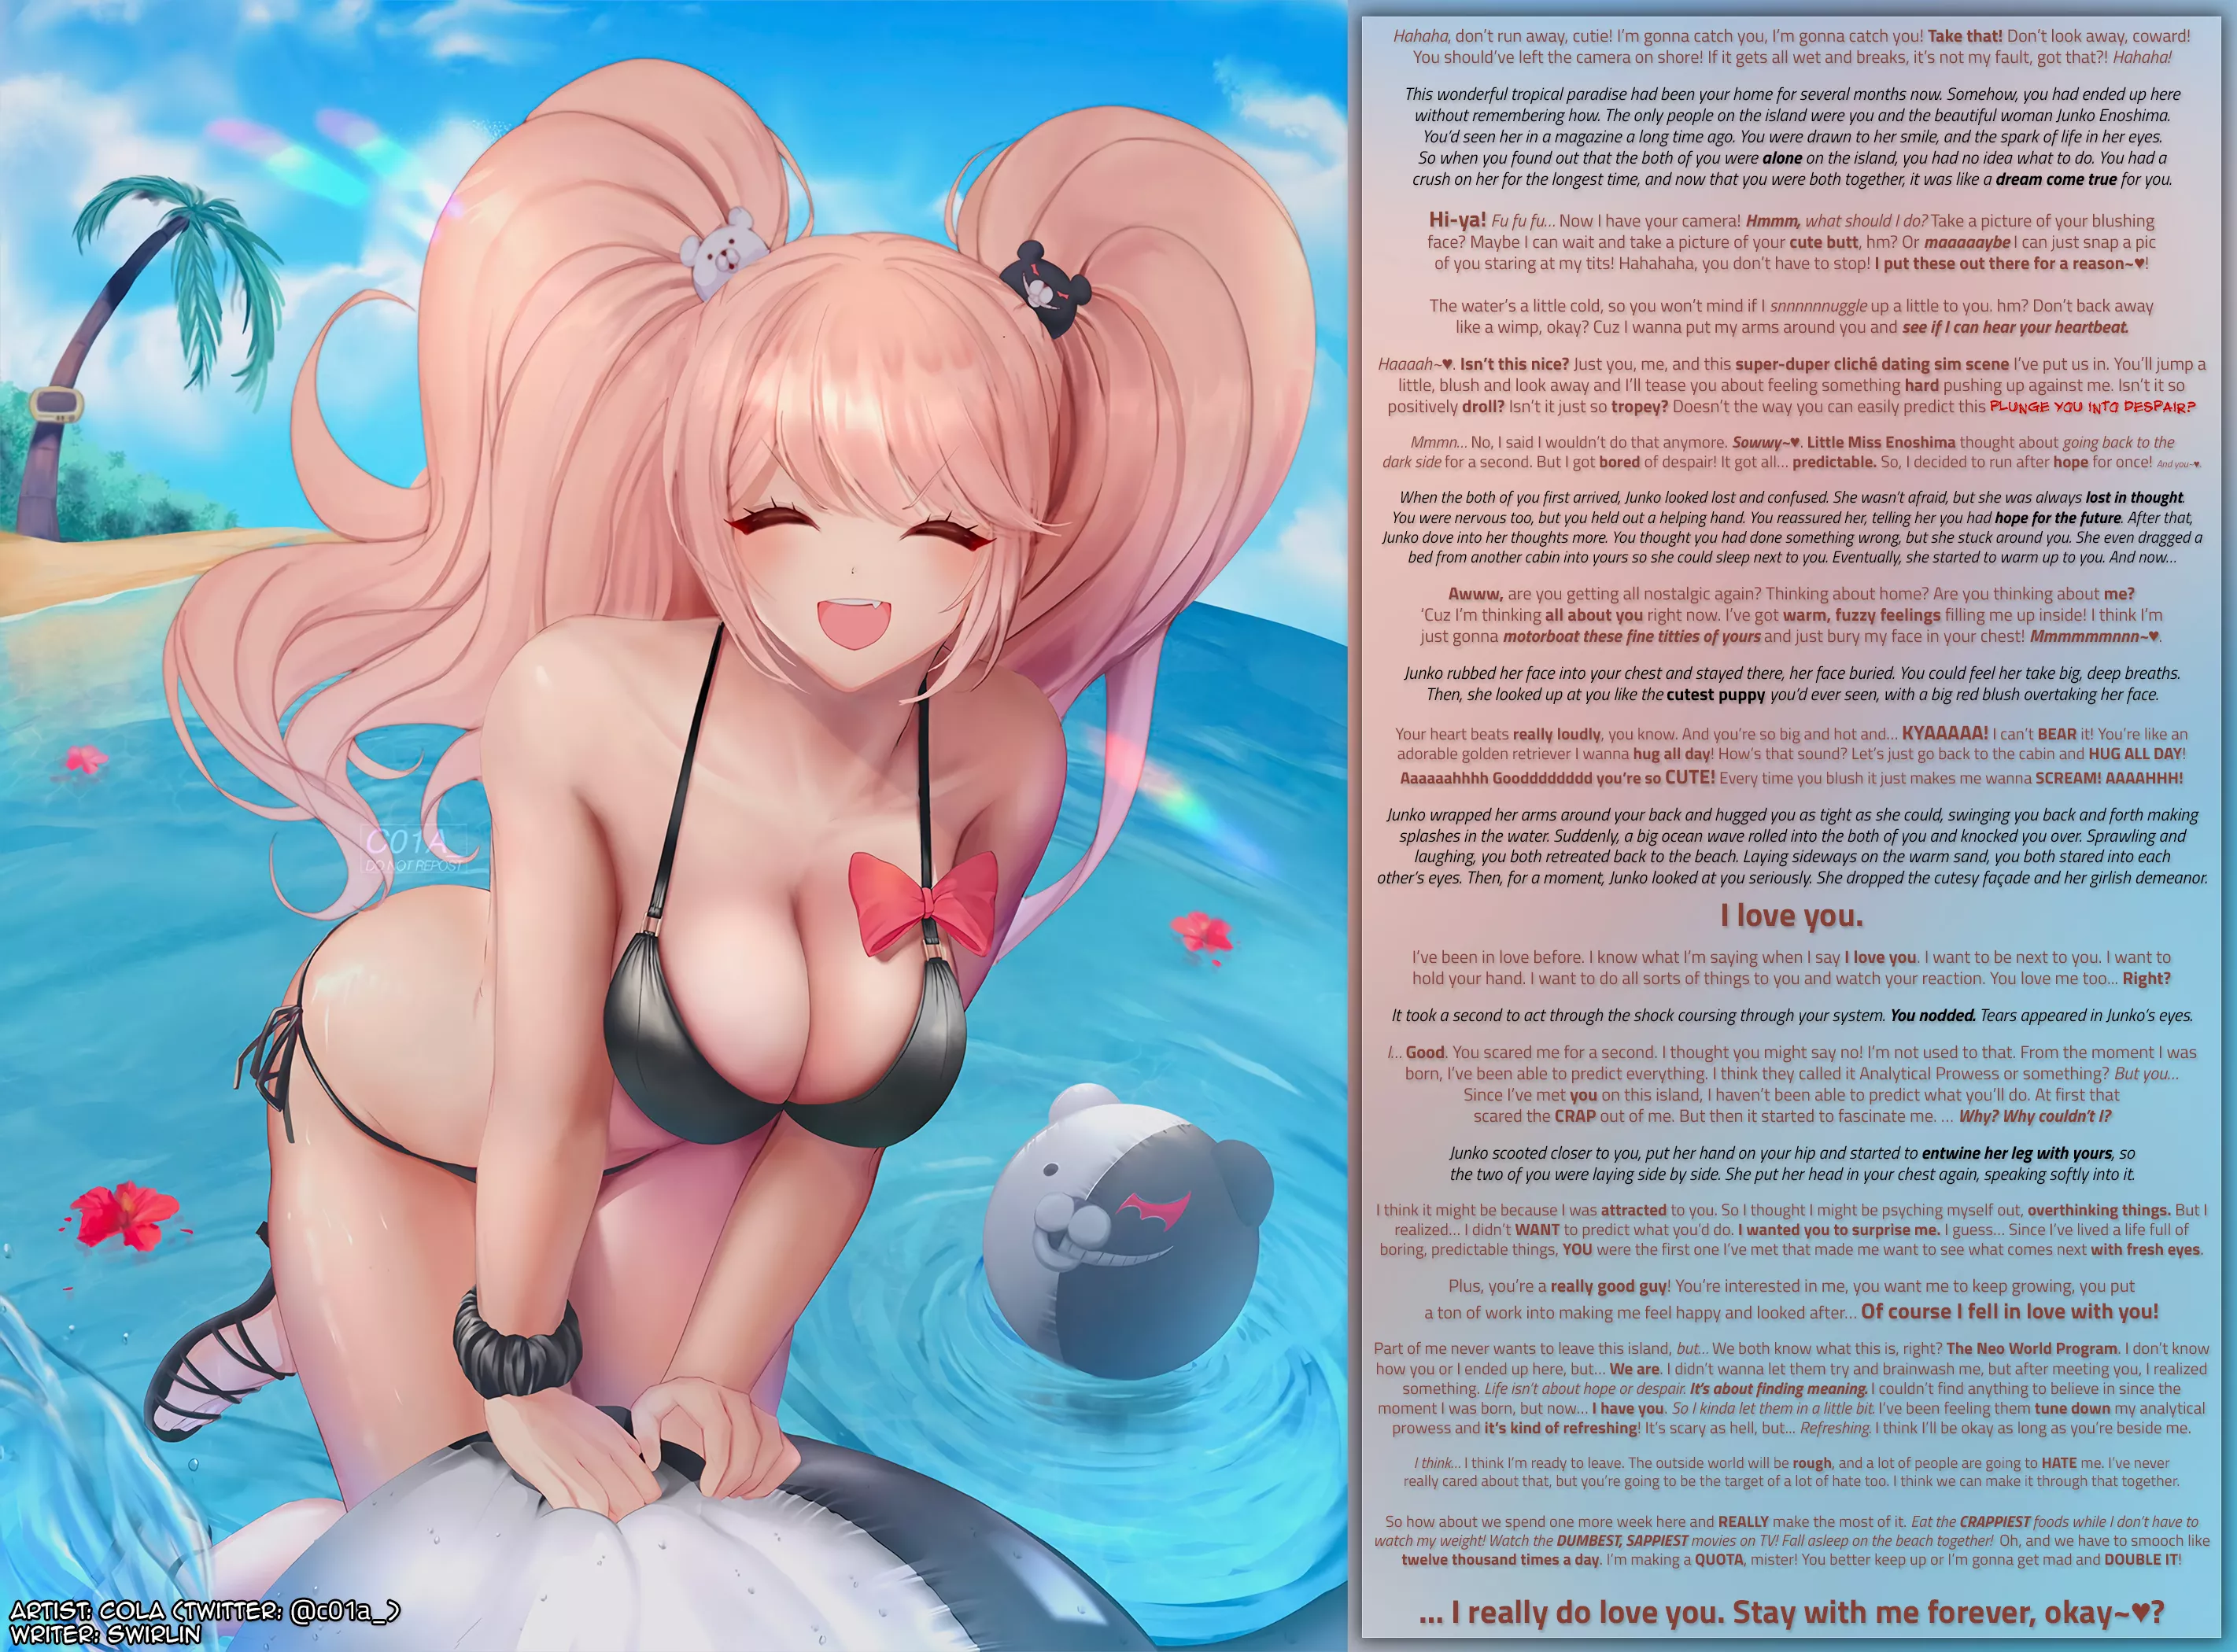 Shrine Porn Captions - The Best, Most Hope-Inducing Caption in the History of Mankind [Romance]  [Wholesome] [Danganronpa] [Enoshima Junko] [Male Viewer] [Confession] nudes  | GLAMOURHOUND.COM